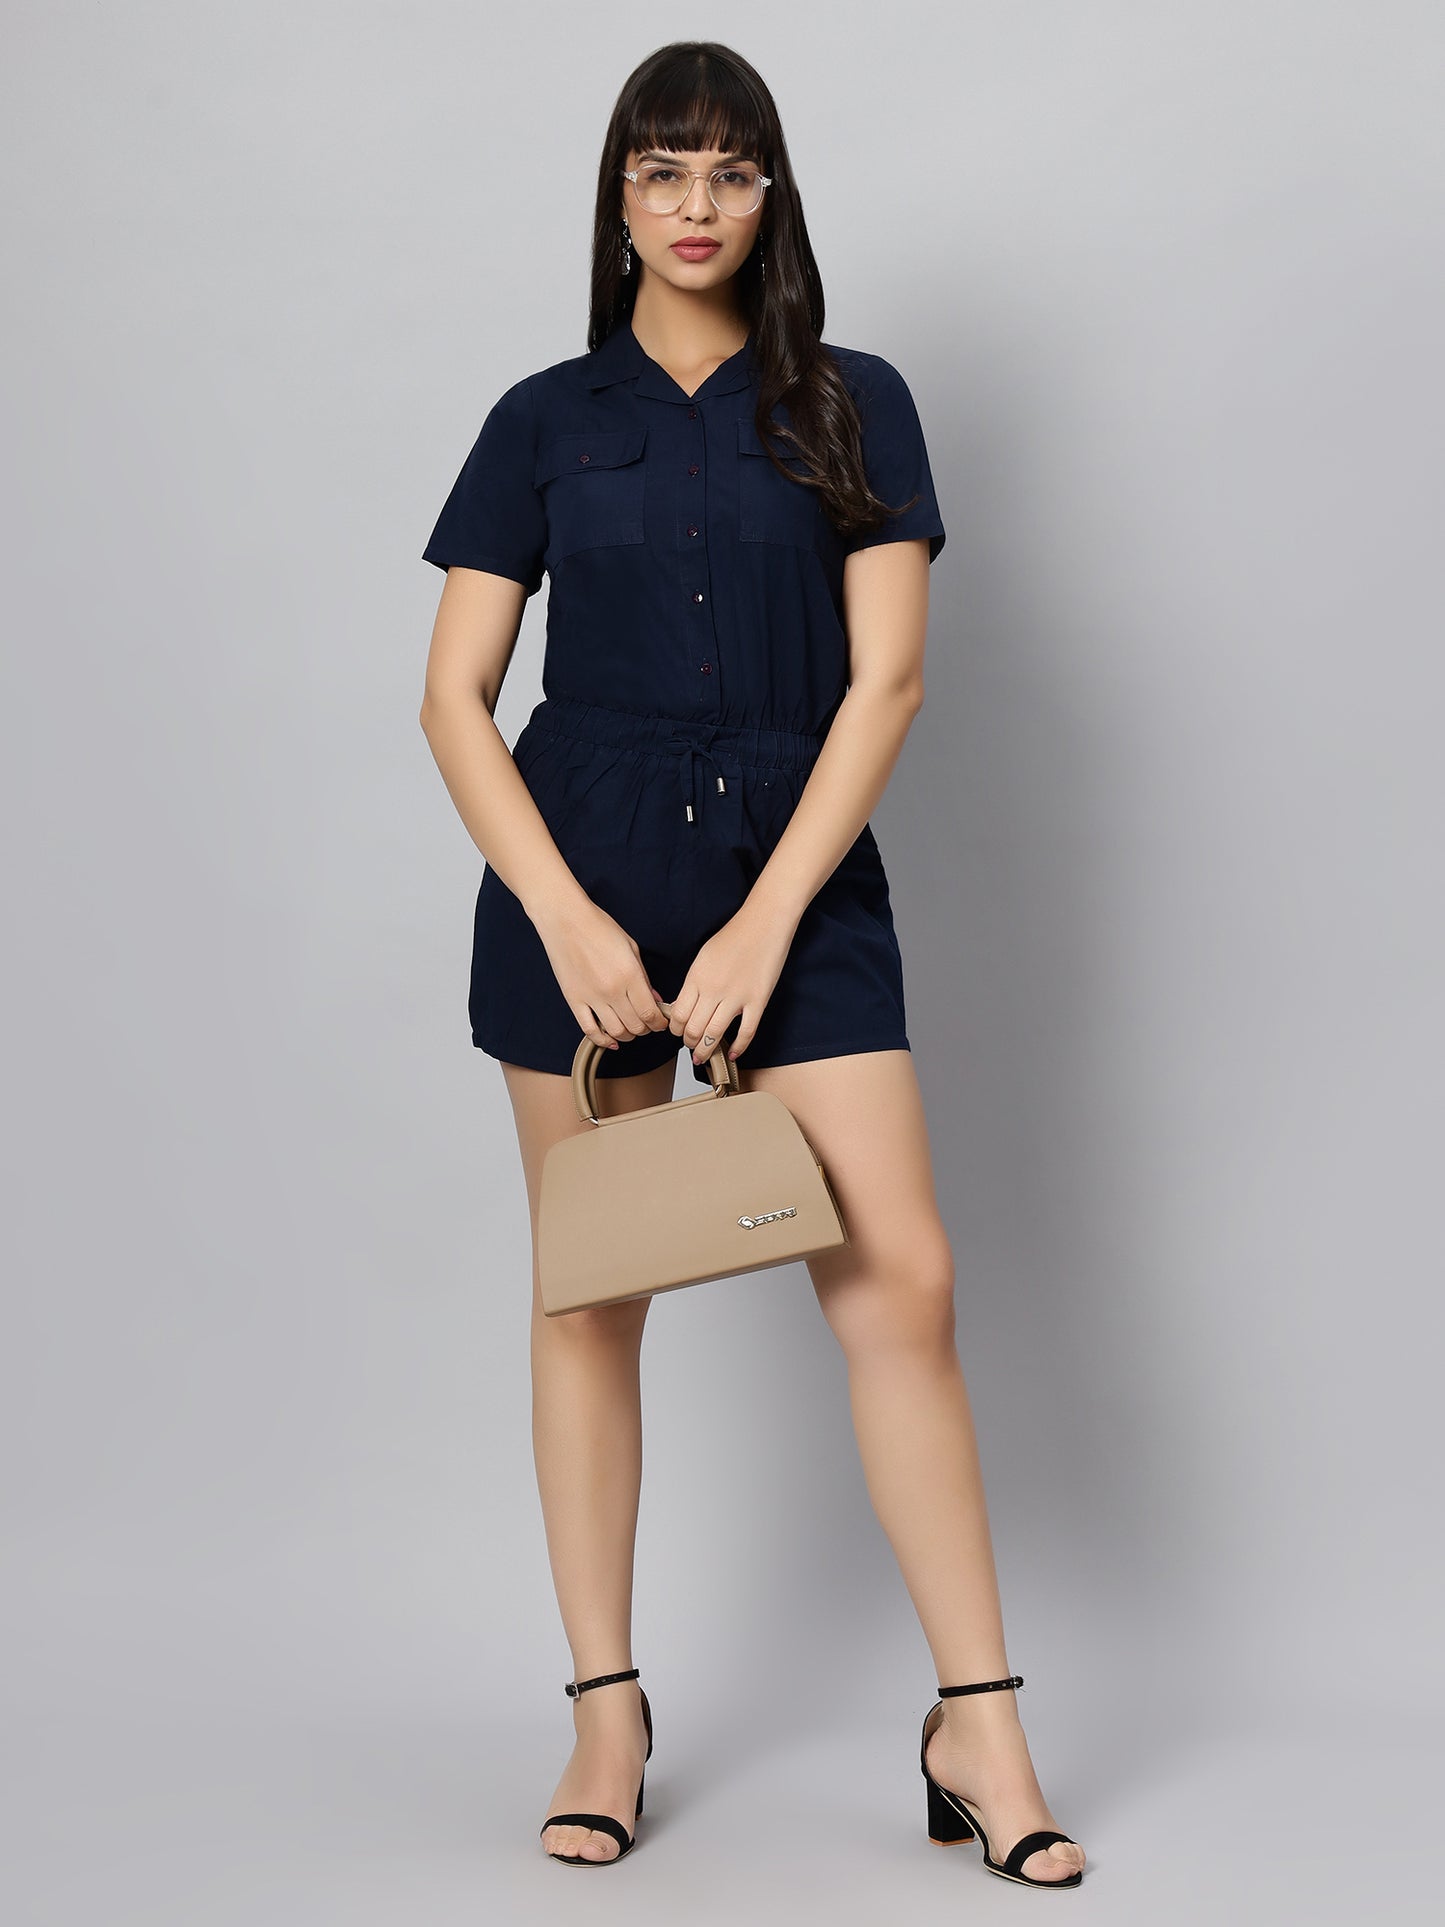 Navy Blue Short Sleeves Playsuit with Flap pockets